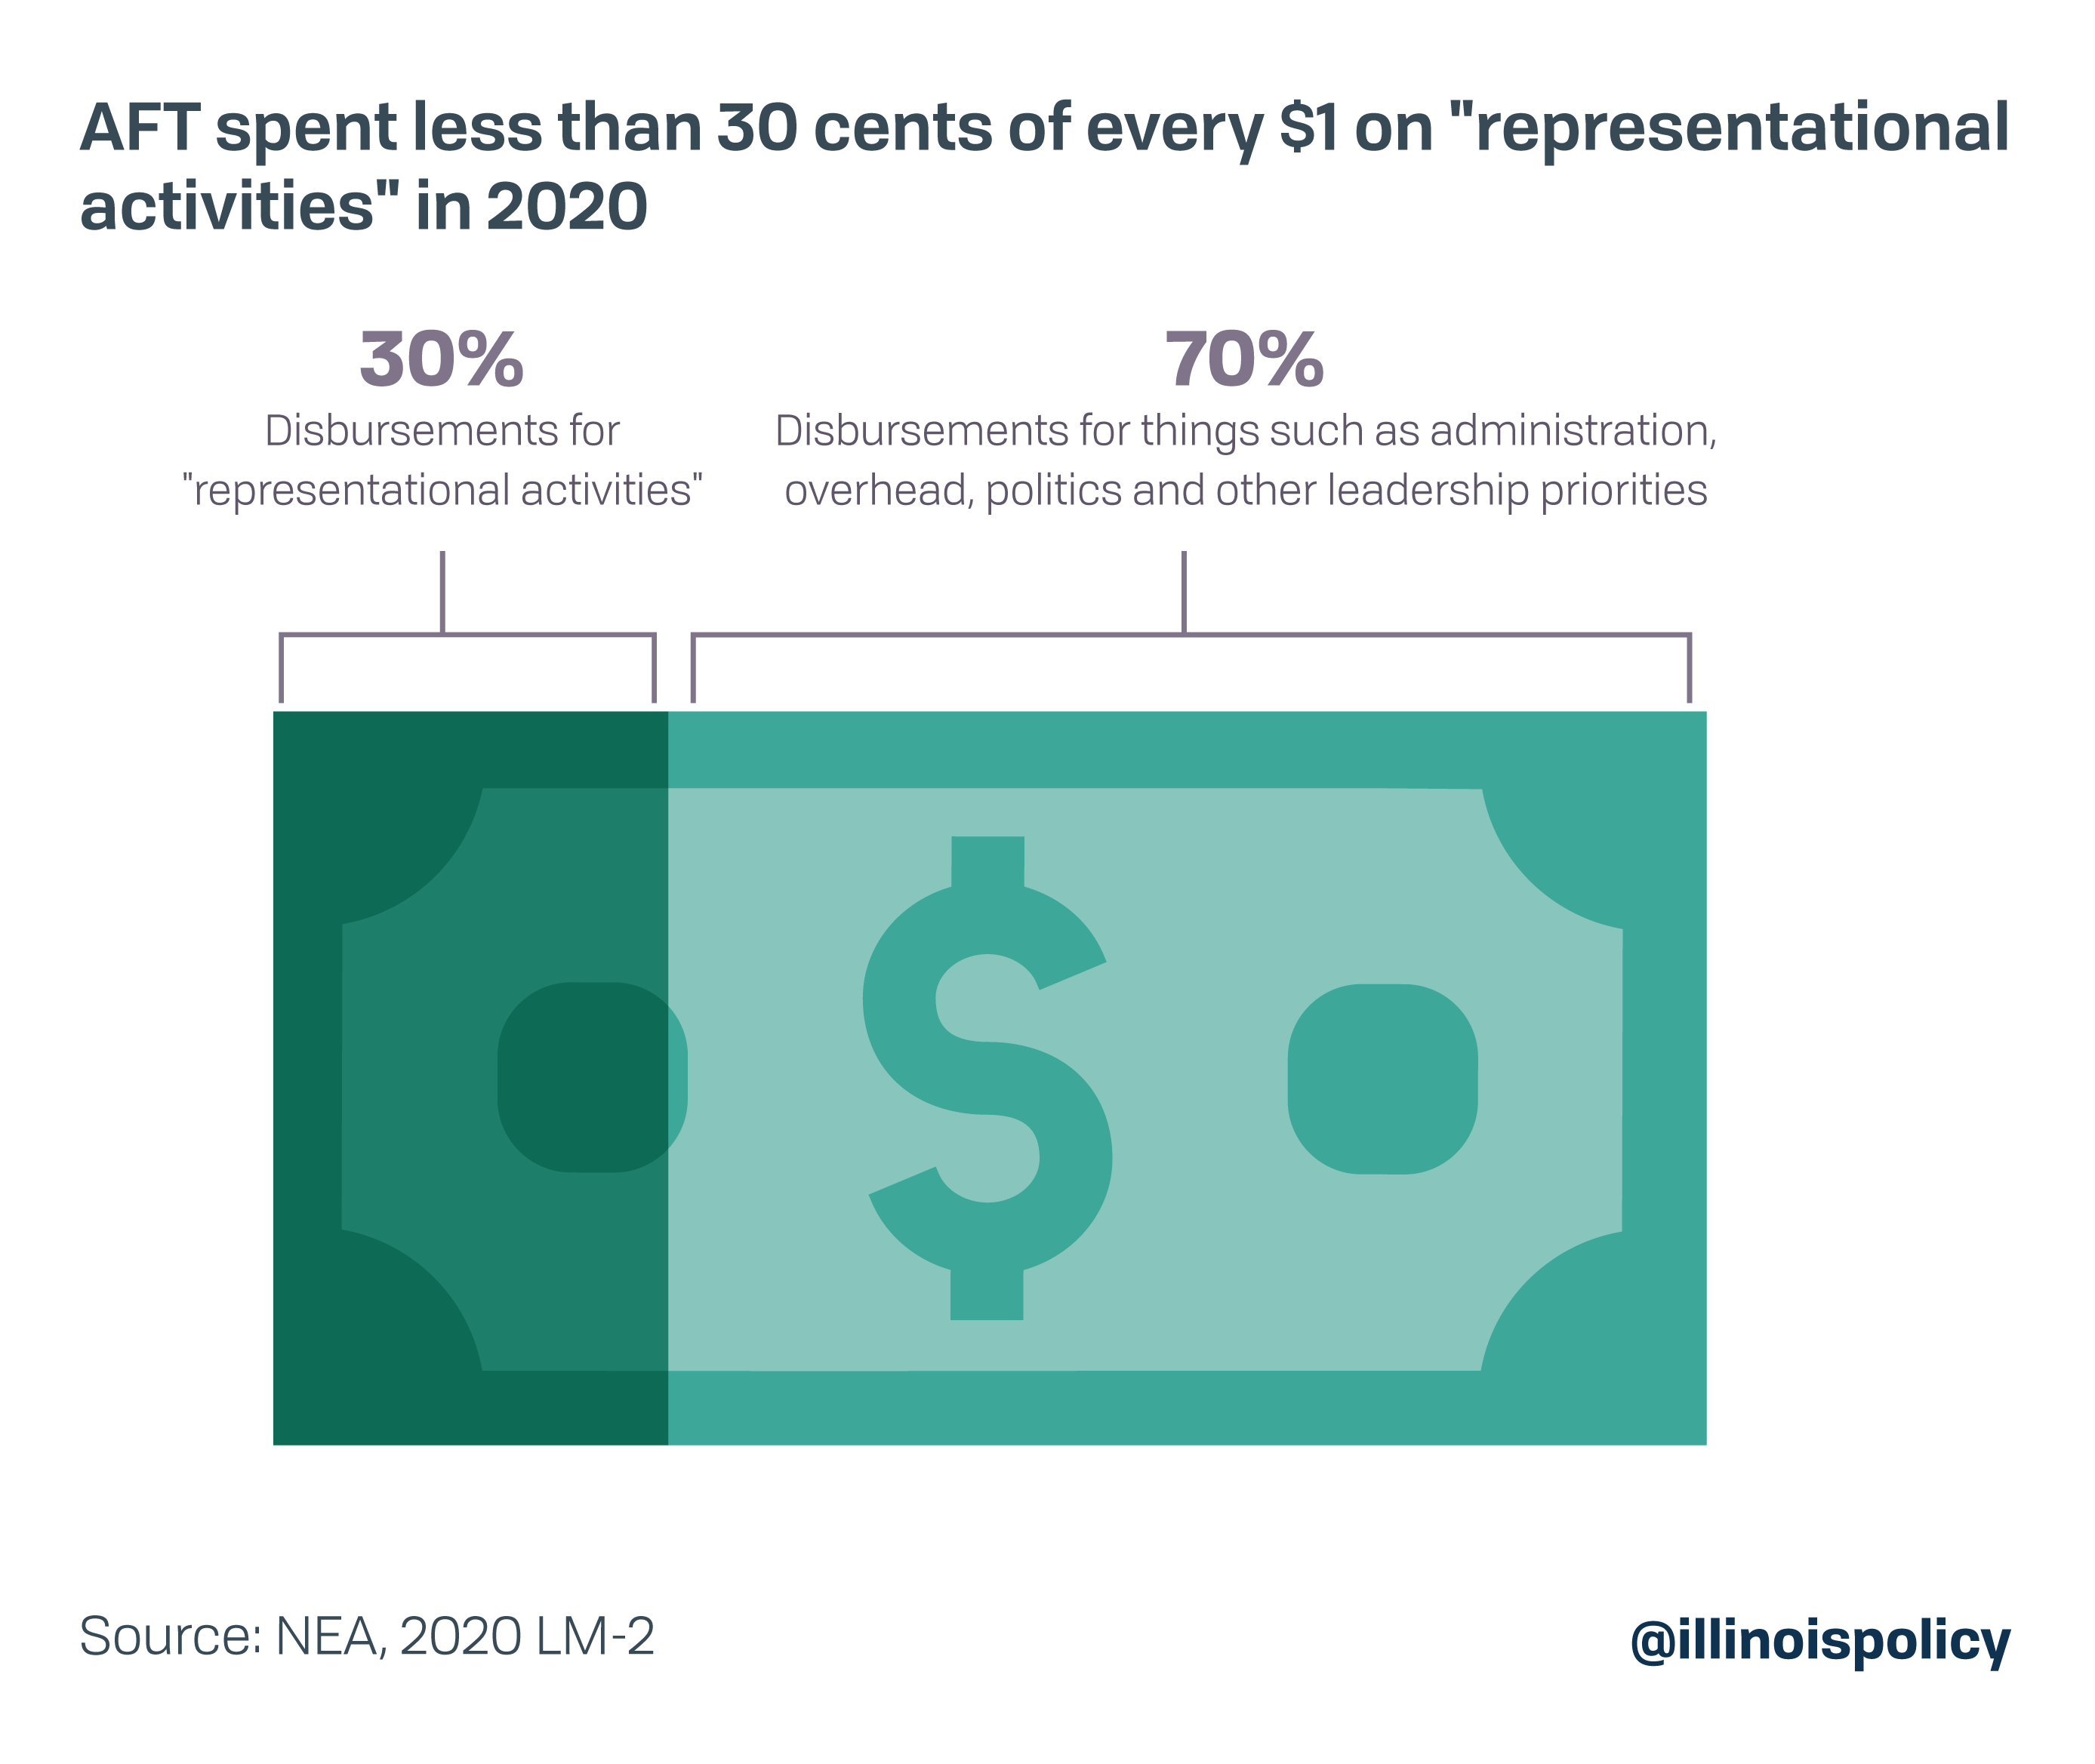 AFT spent less than 30 cents of every $1 on "representational activities" in 2020